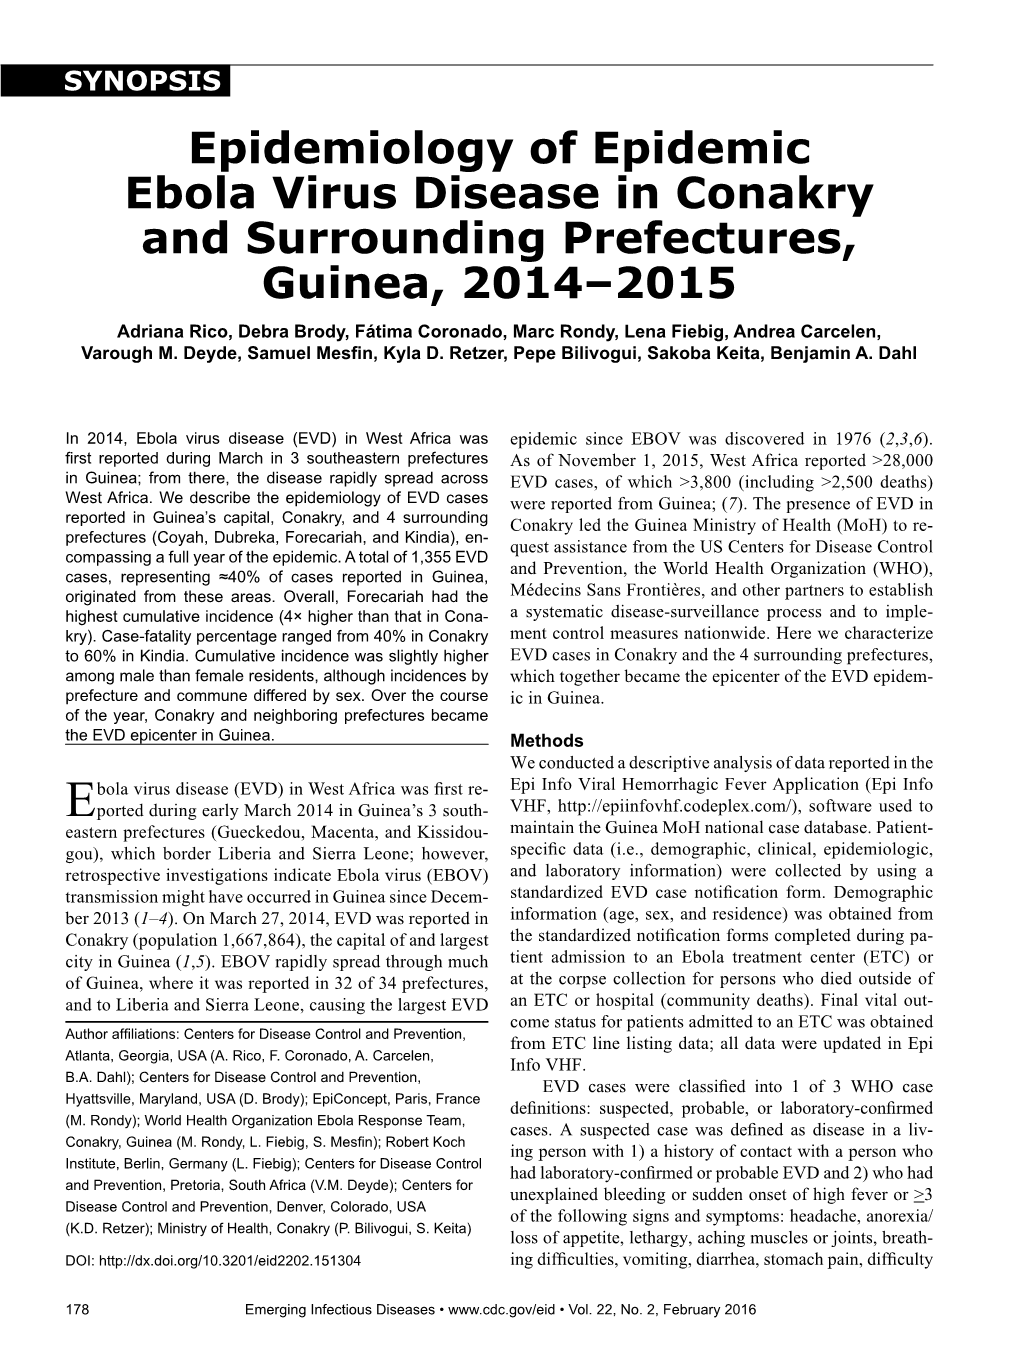 Epidemiology of Epidemic Ebola Virus Disease in Conakry And